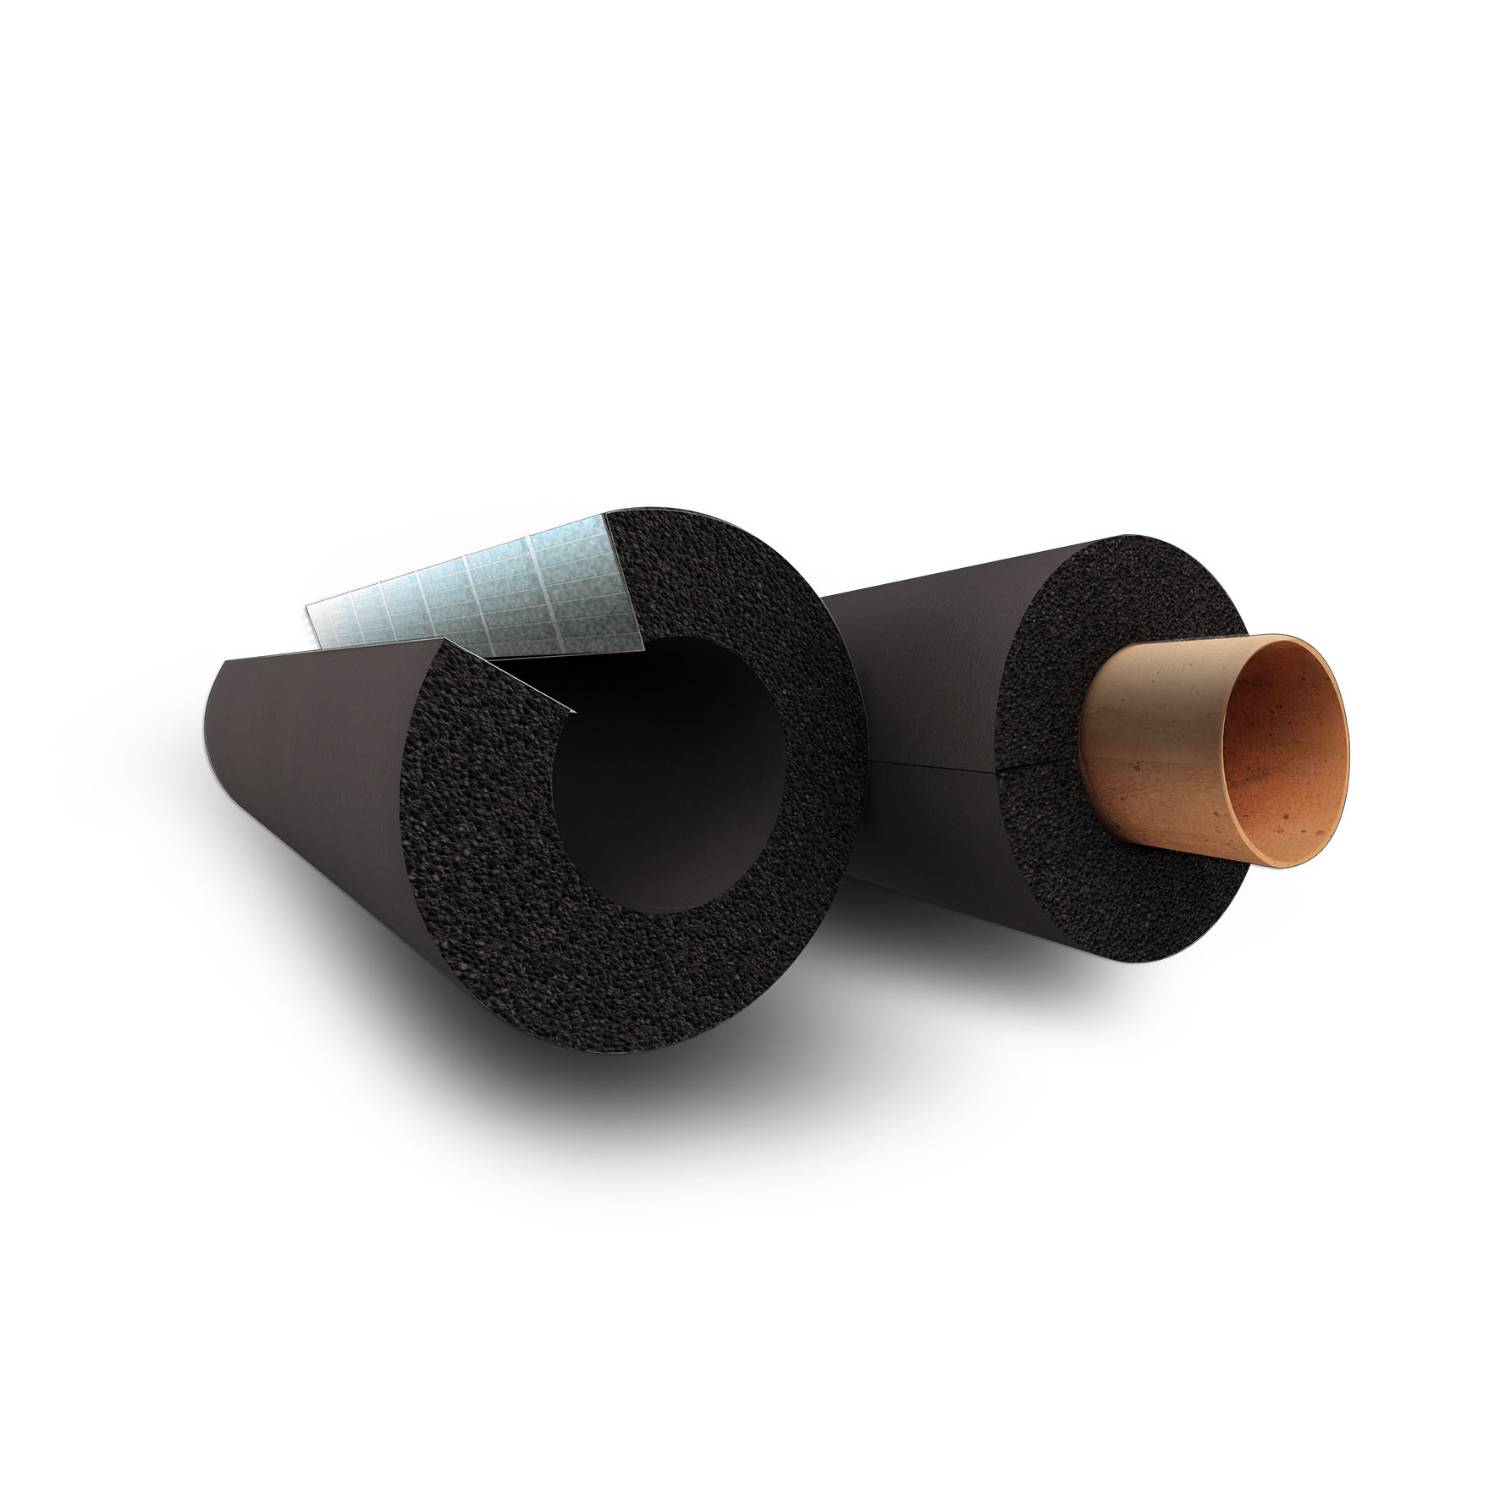 Kaiflex ST Selfseal Tubes - Rubber pipe insulation